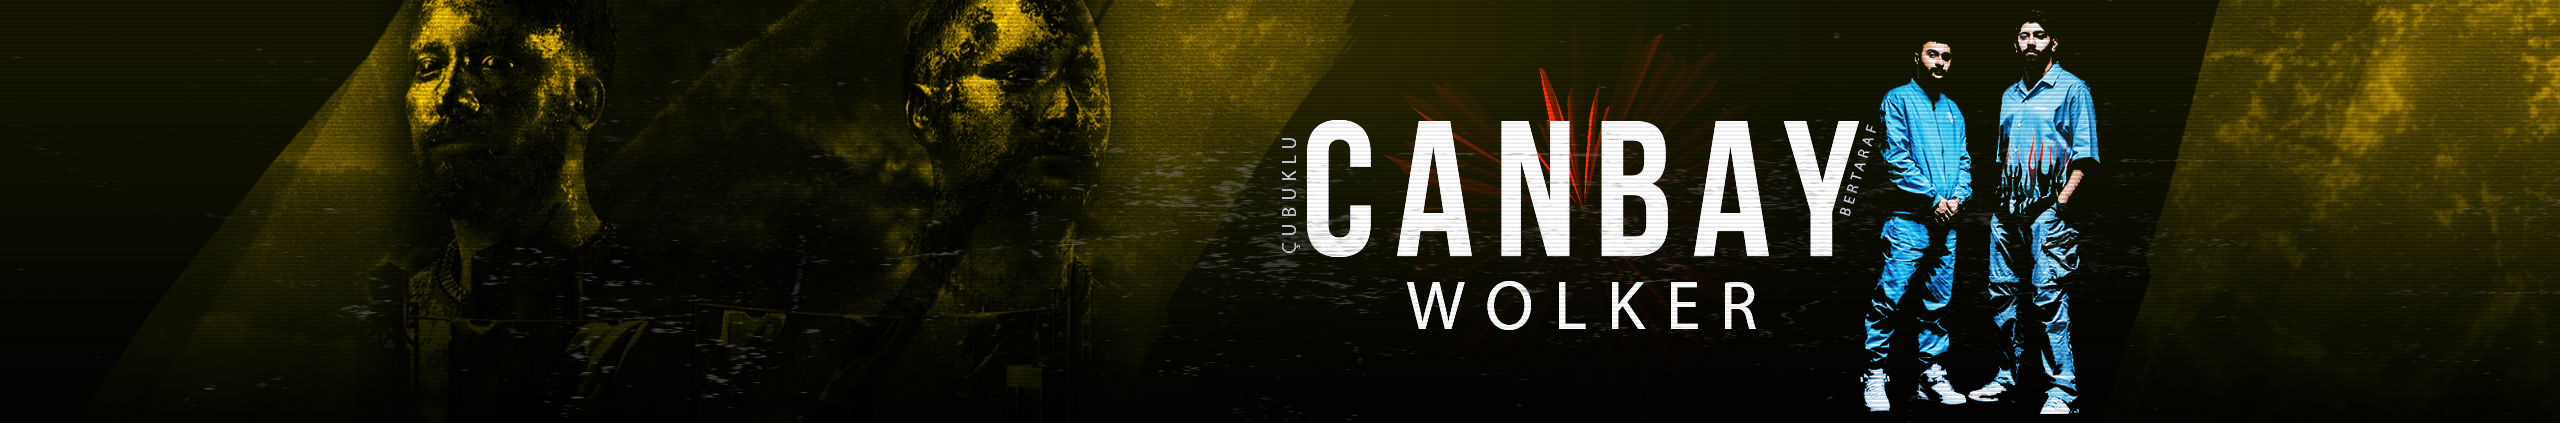 Canbay--Wolker-Banner.png